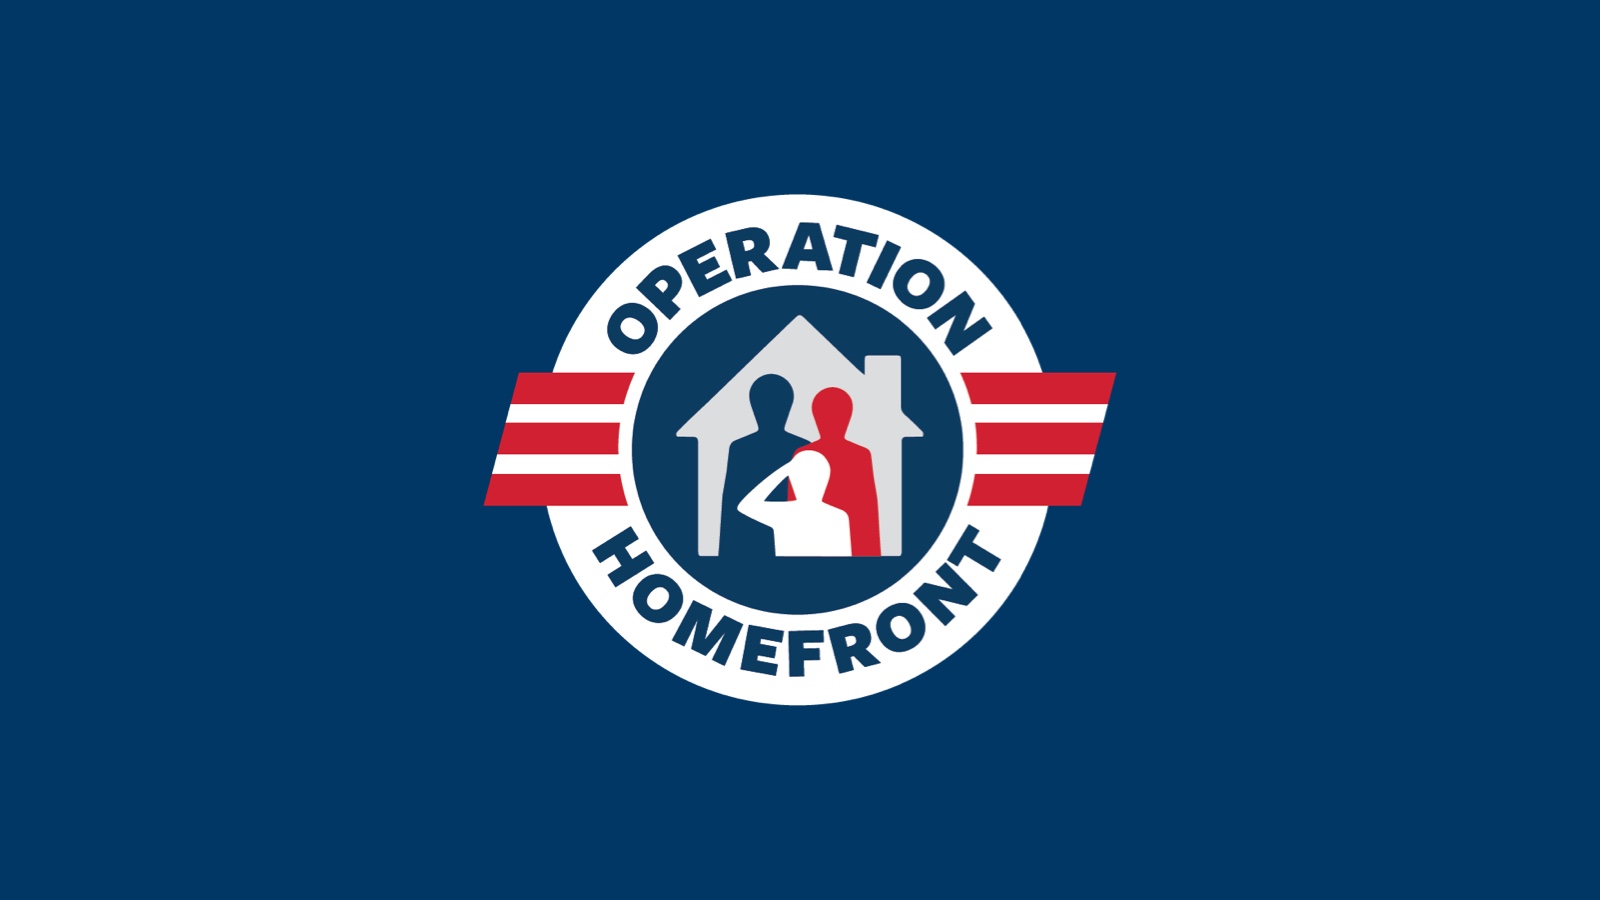 Operation Homefront - Operation Homefront